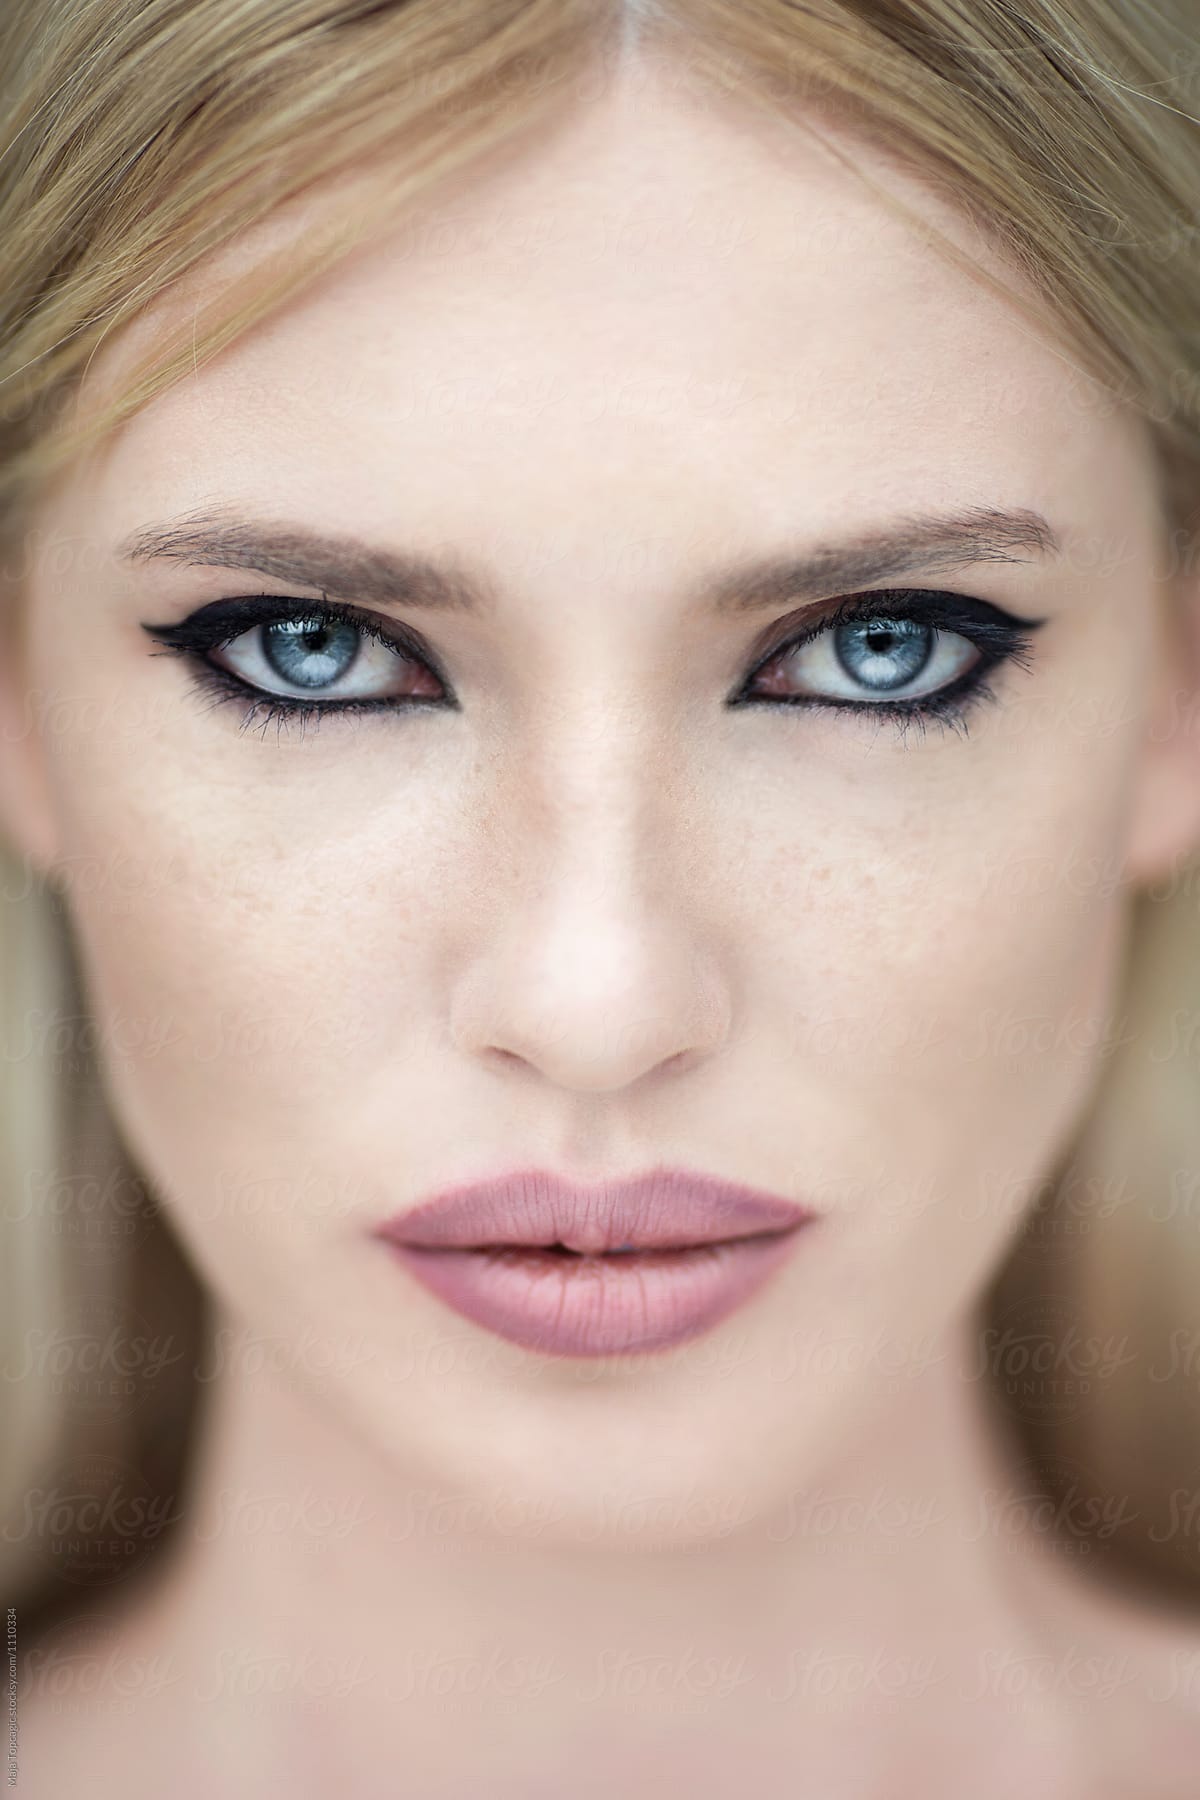 Beautiful Woman With Blue Eyes And Freckles By Stocksy Contributor Maja Topcagic Stocksy